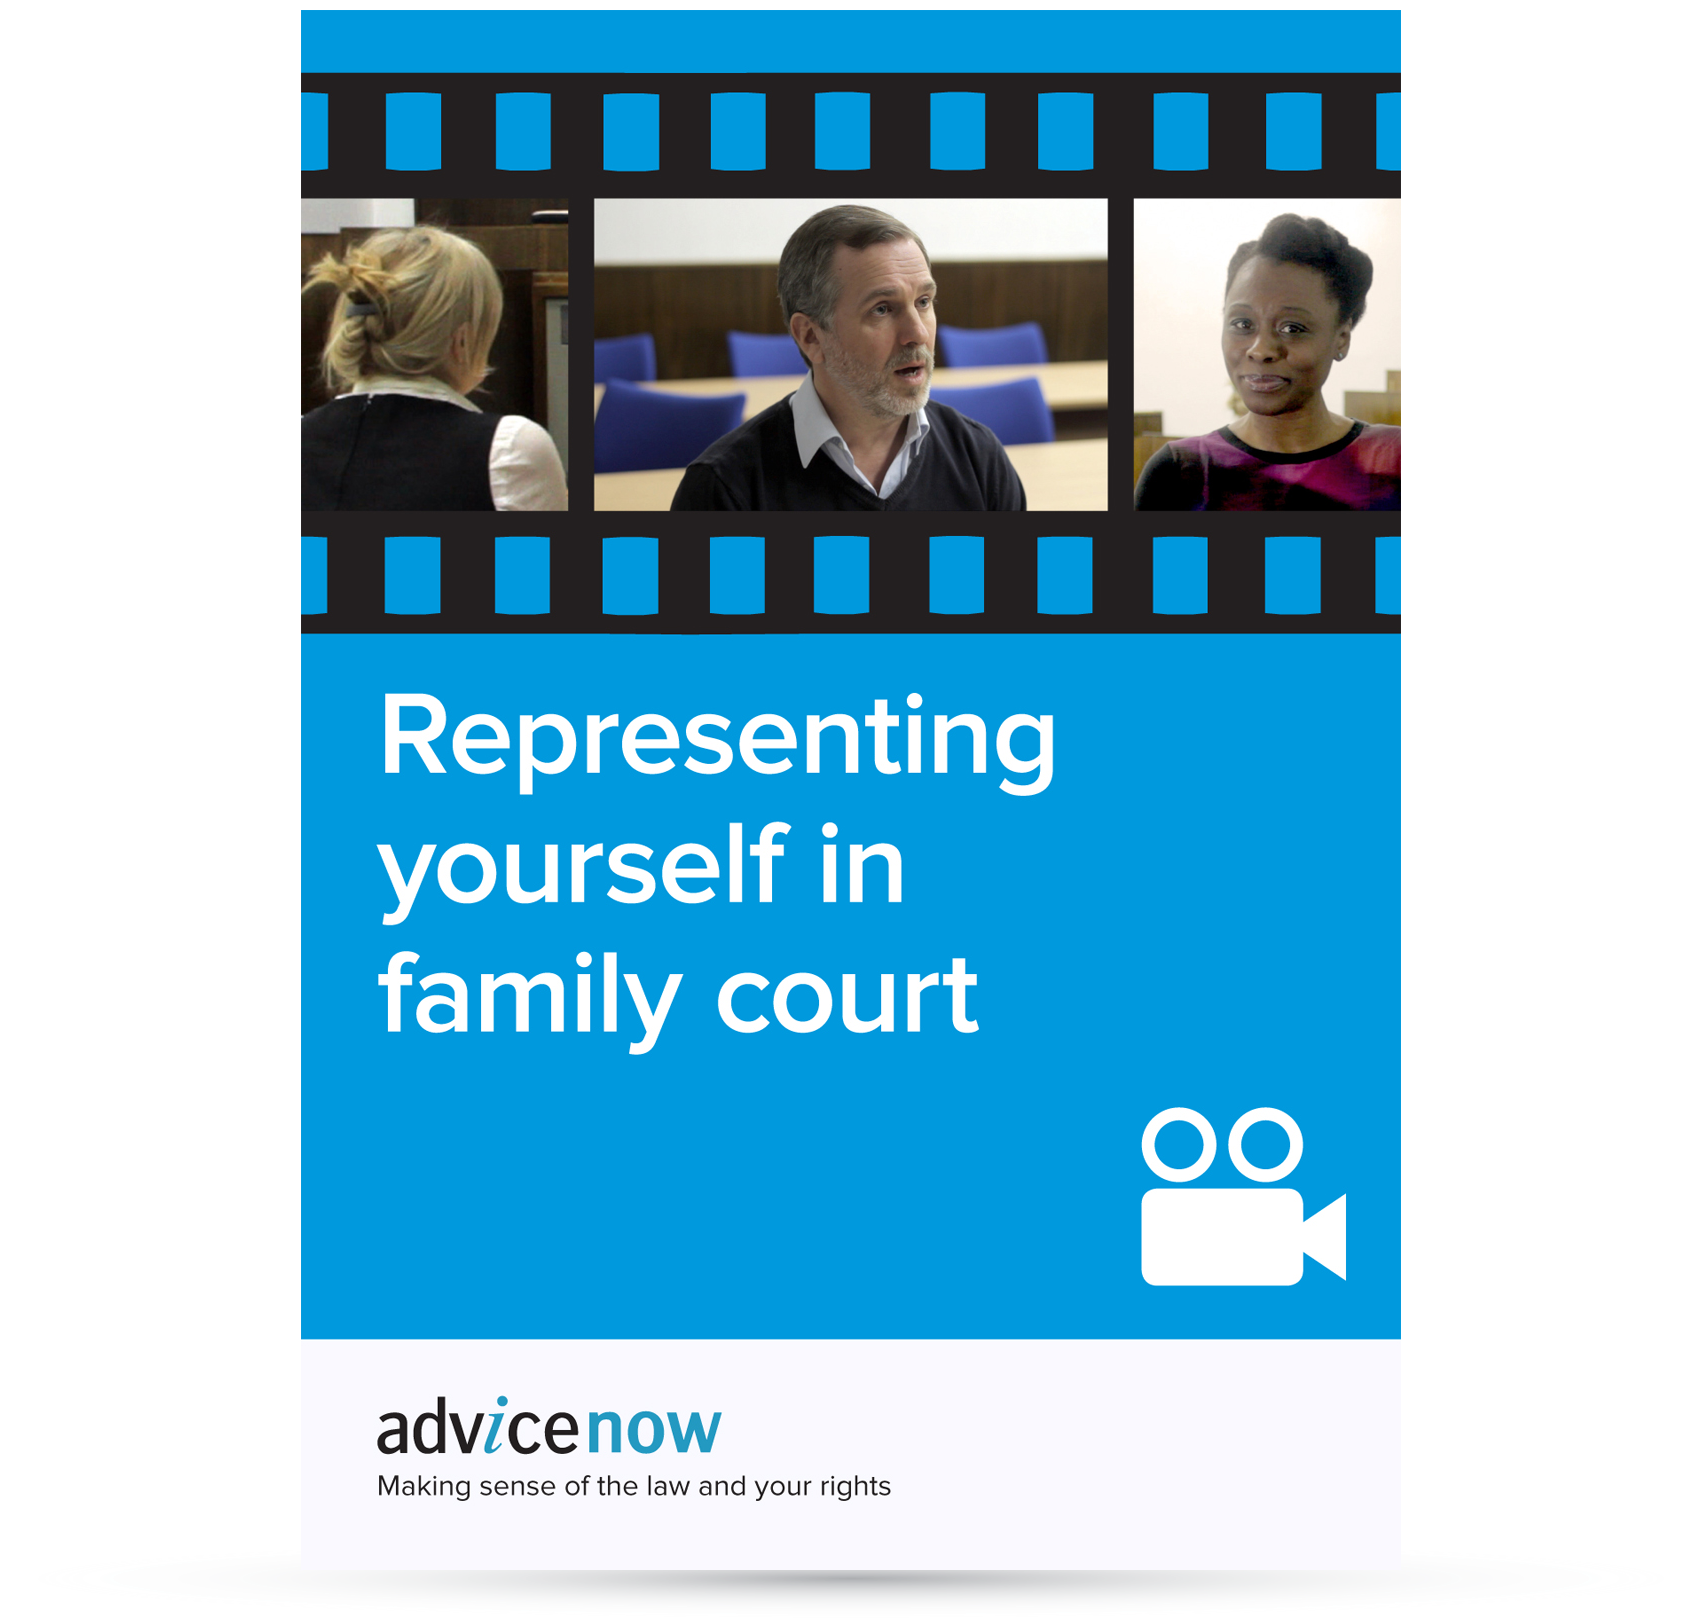 Representing yourself in family court film Advicenow